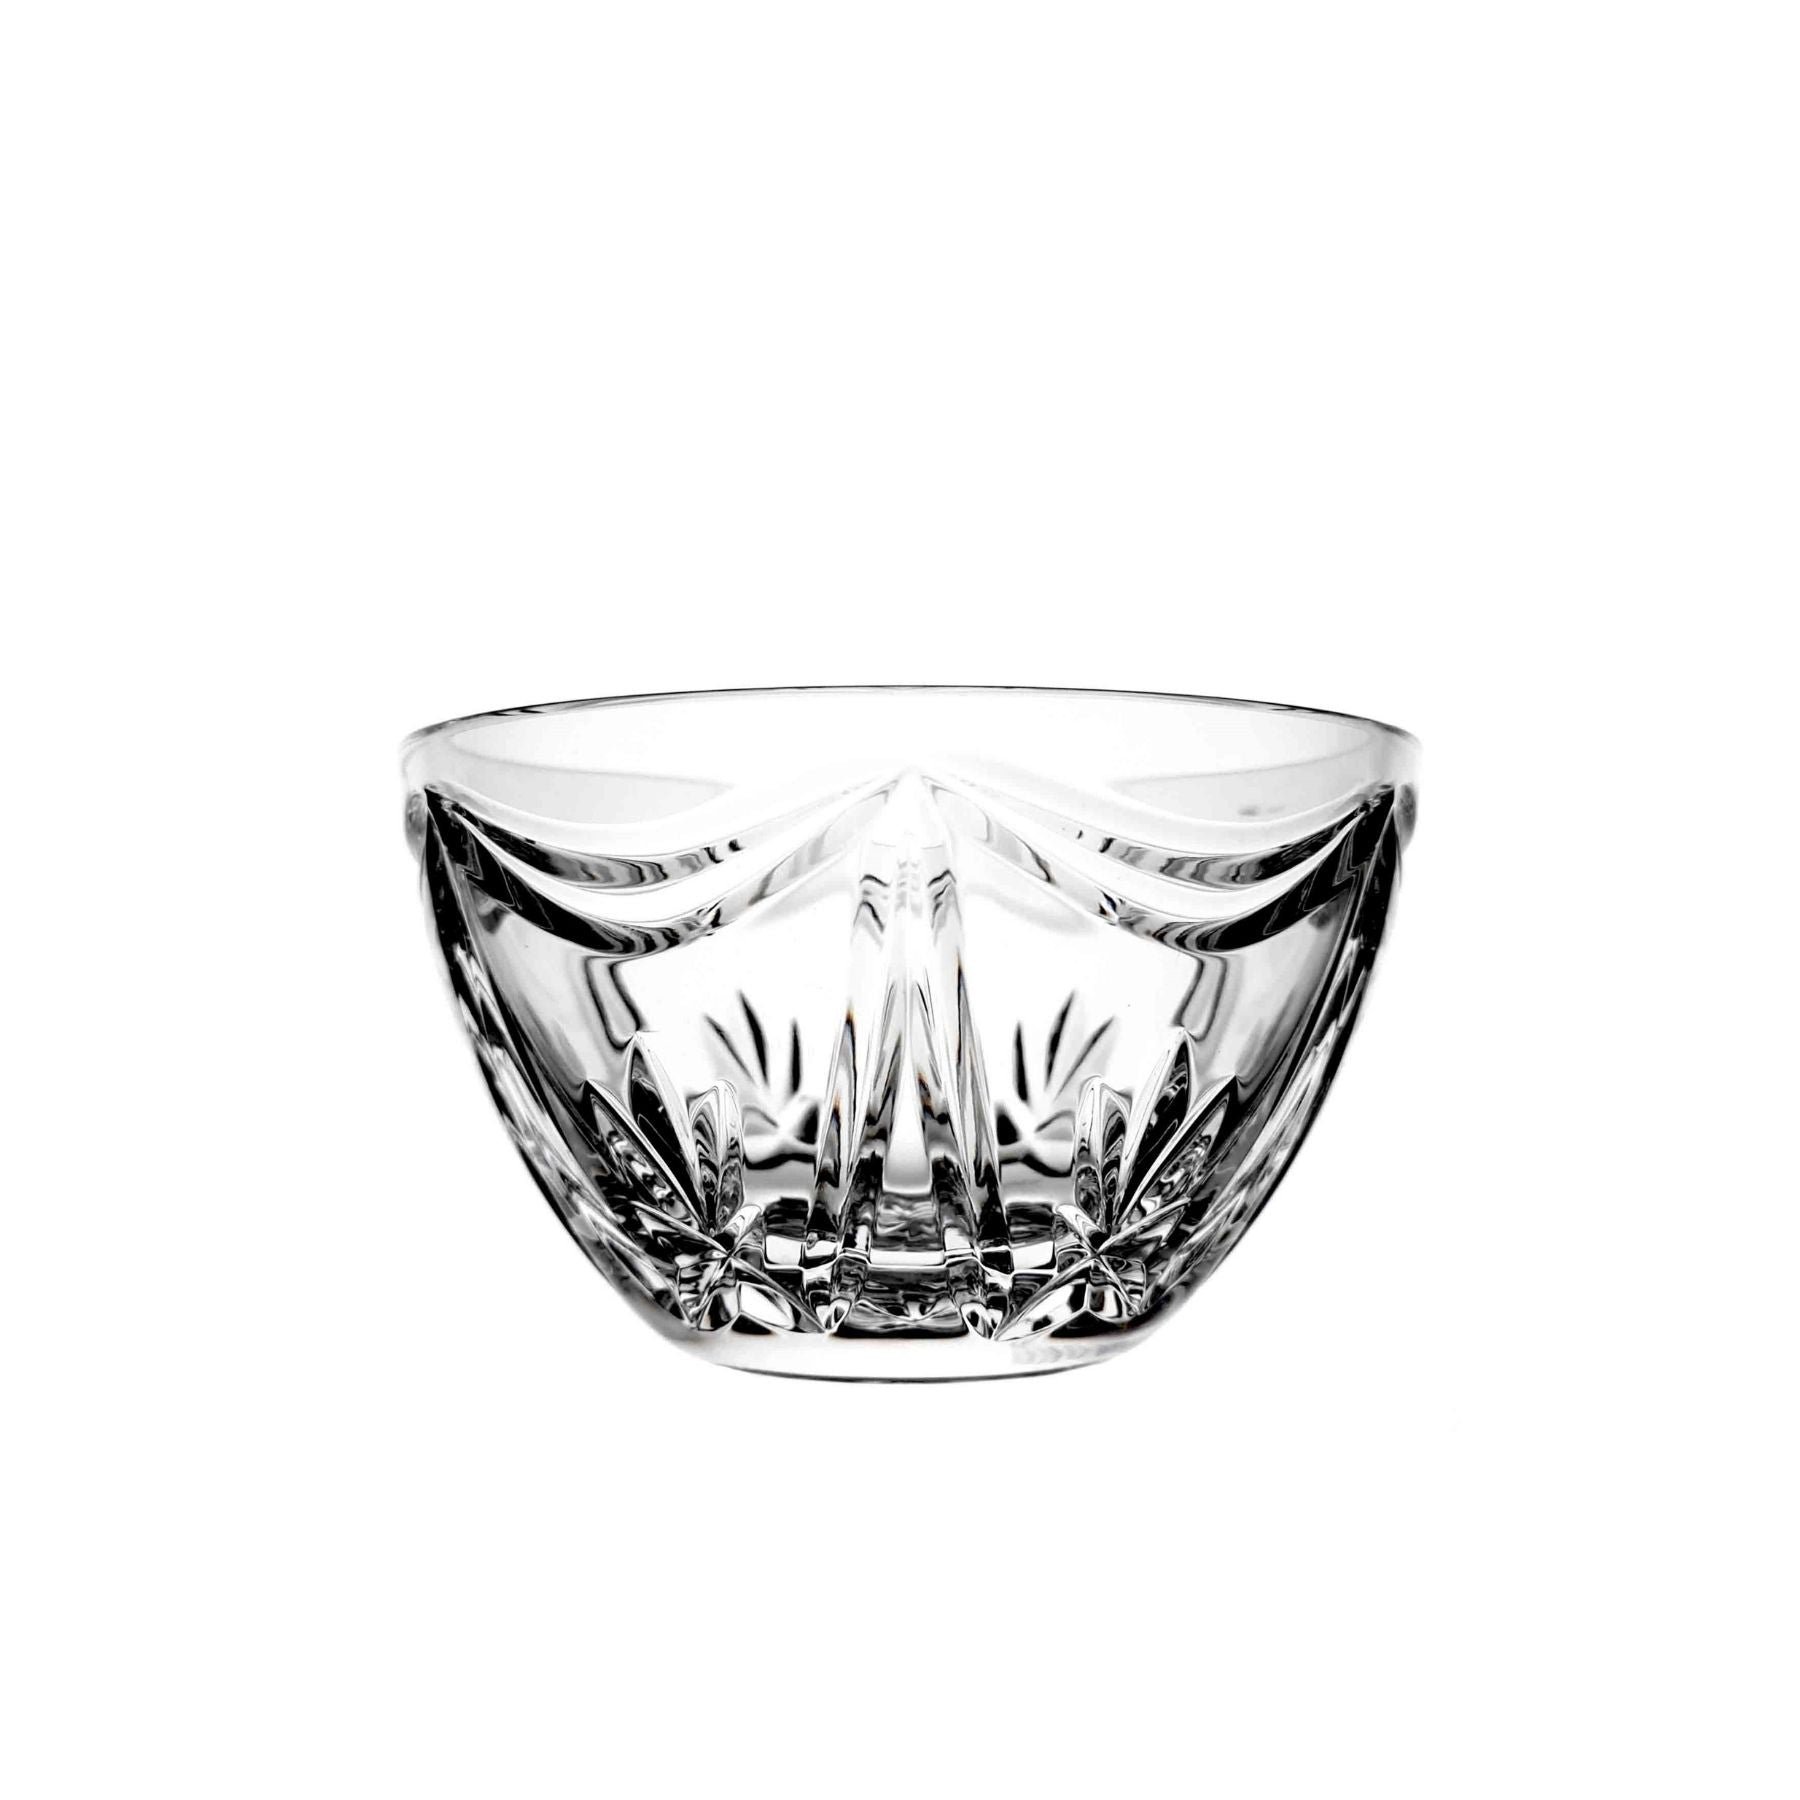 Waterford Crystal Heritage Variety Bowl 5"  Stunning crystal bowl, crystal variety bowl with eye-catching accents, sure to make a statement in any home. Discover Waterford's collection of crystal bowls with intricately cut patterns and contemporary shapes.